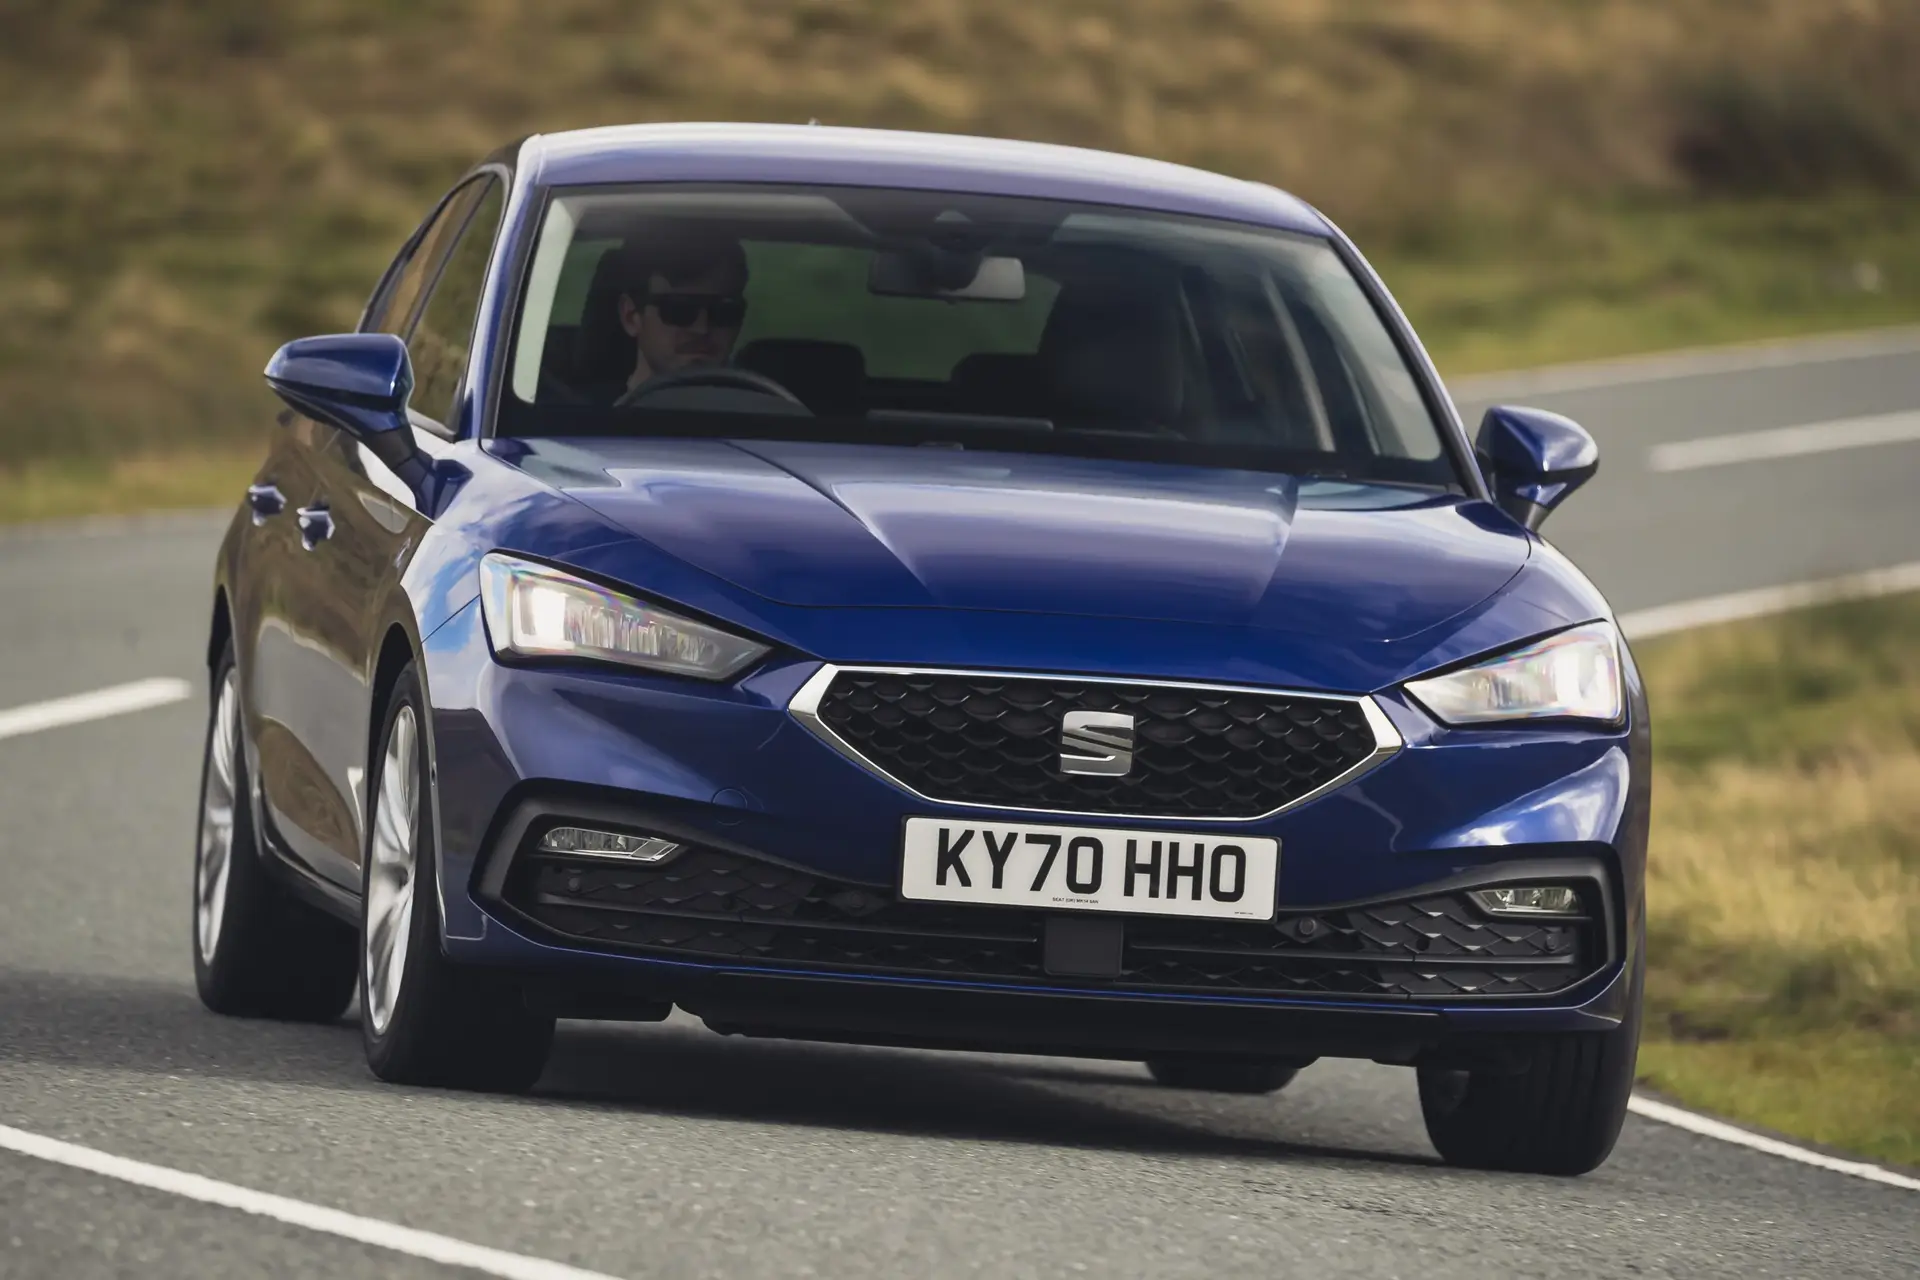 Best Budget Family Hatchback Seat Leon Mk2 Tdi 2.0 Review And